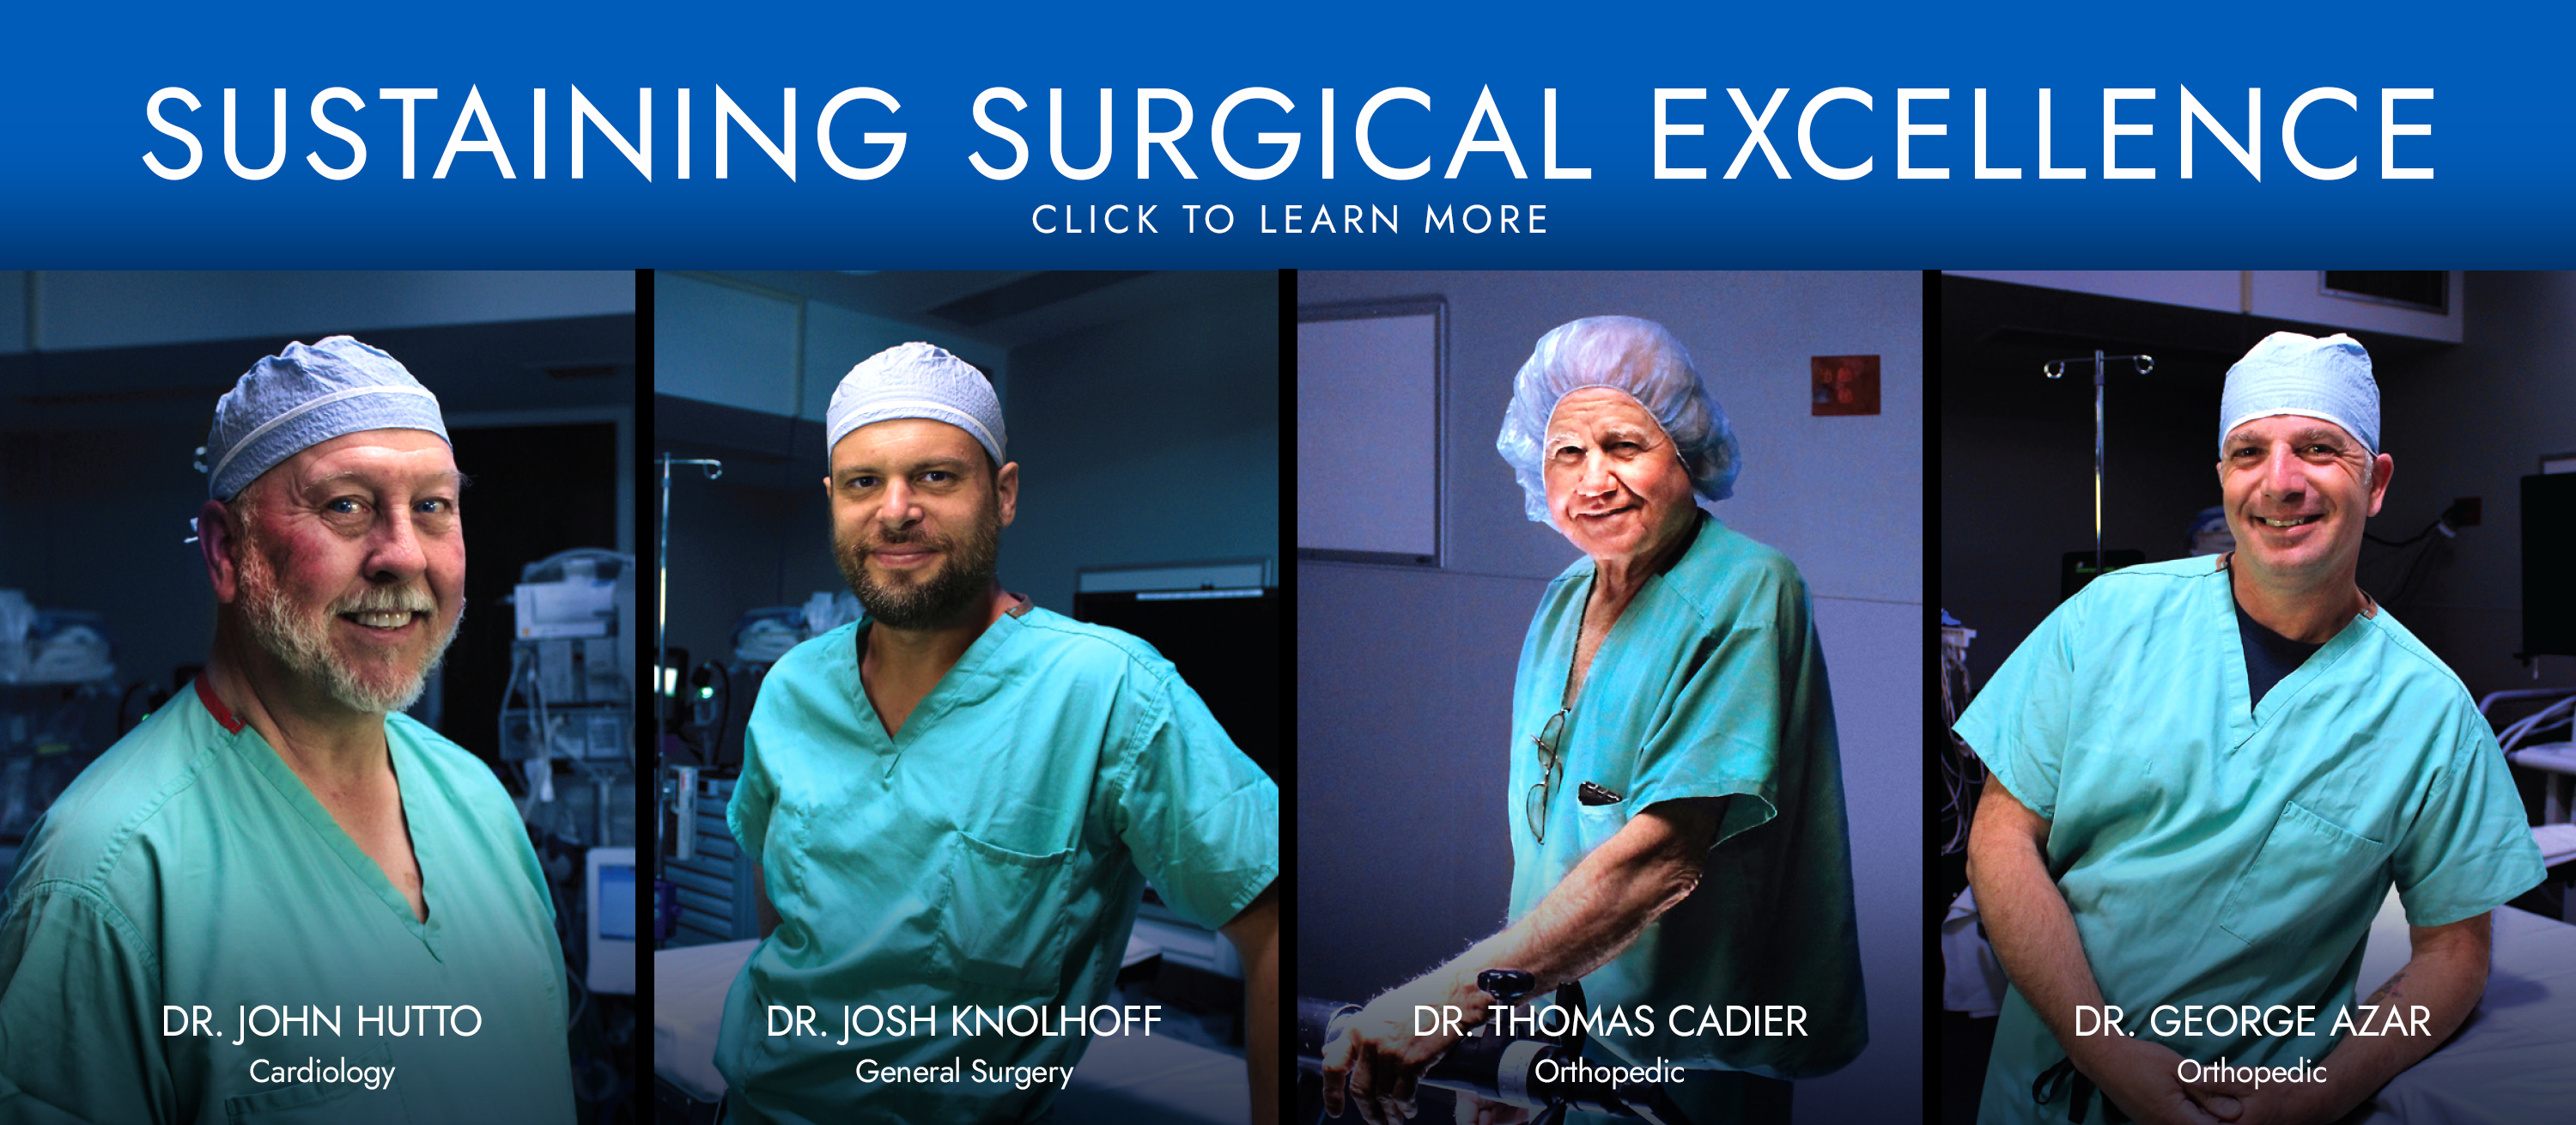 Sustaining Surgical Excellence 


Click to Learn More

Dr. John Hutto
Cardiology 

Dr. Josh Knolhoff
General Surgery

Dr. Thomas Caider 
Orthopedic

Dr. George Azar
Orthopedic